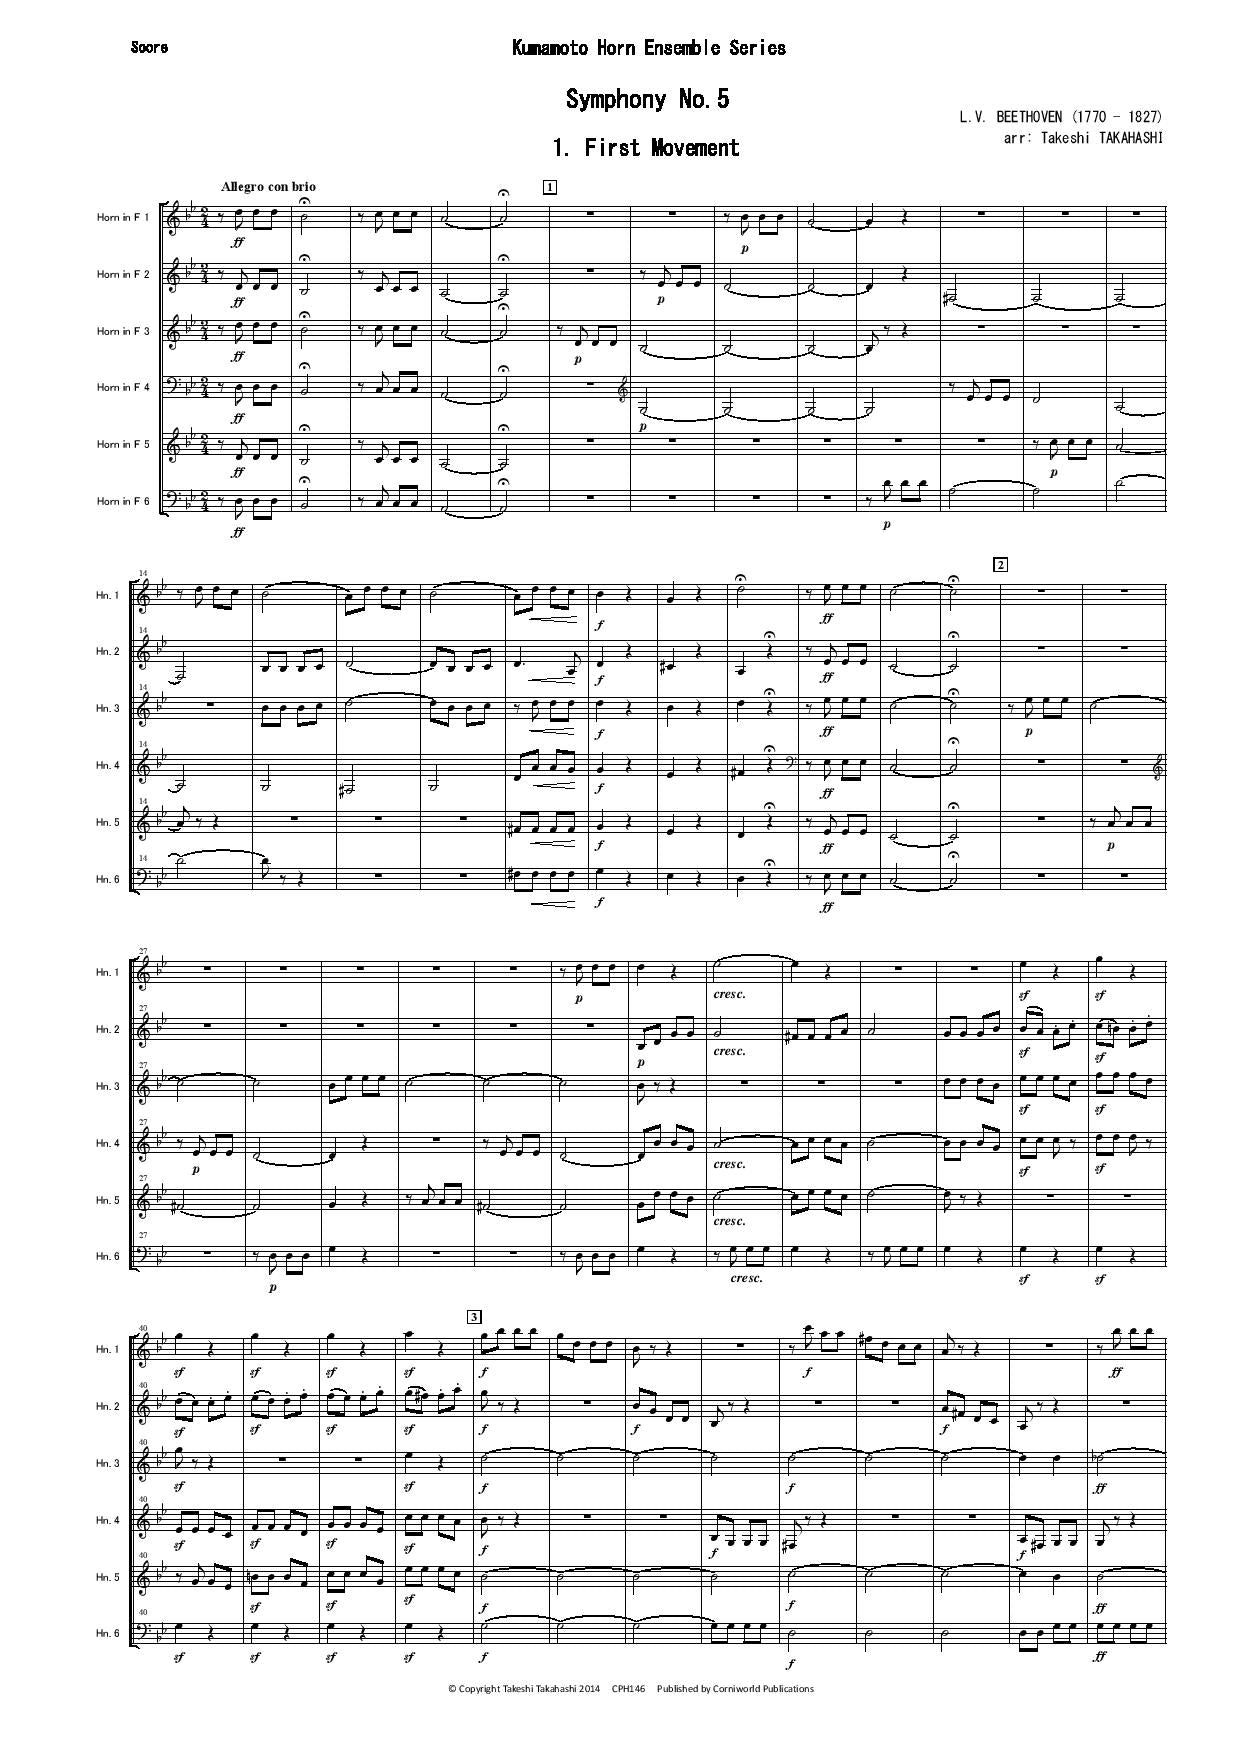 1st Mvt from Symphony No.5 (Beethoven) CPH146